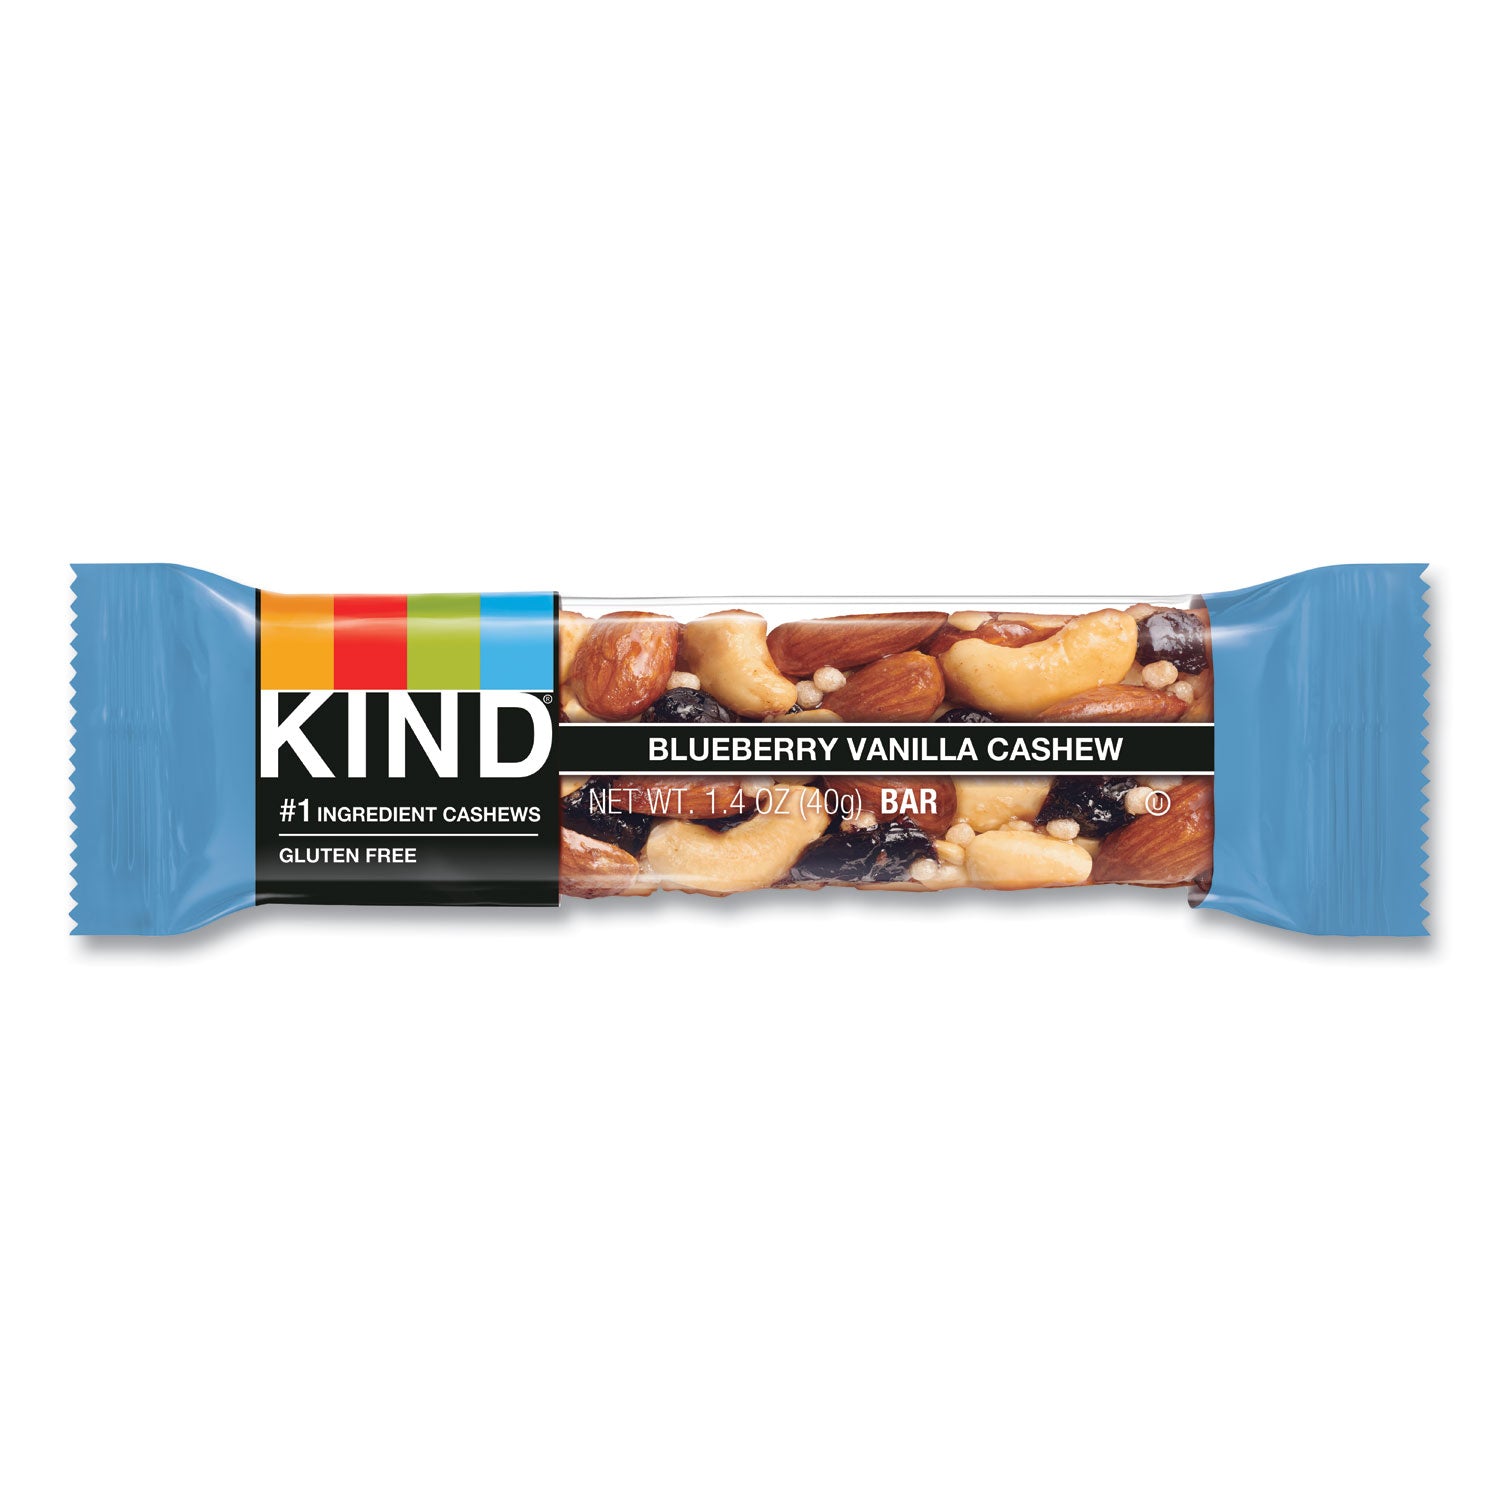 fruit-and-nut-bars-blueberry-vanilla-and-cashew-14-oz-bar-12-box_knd18039 - 2